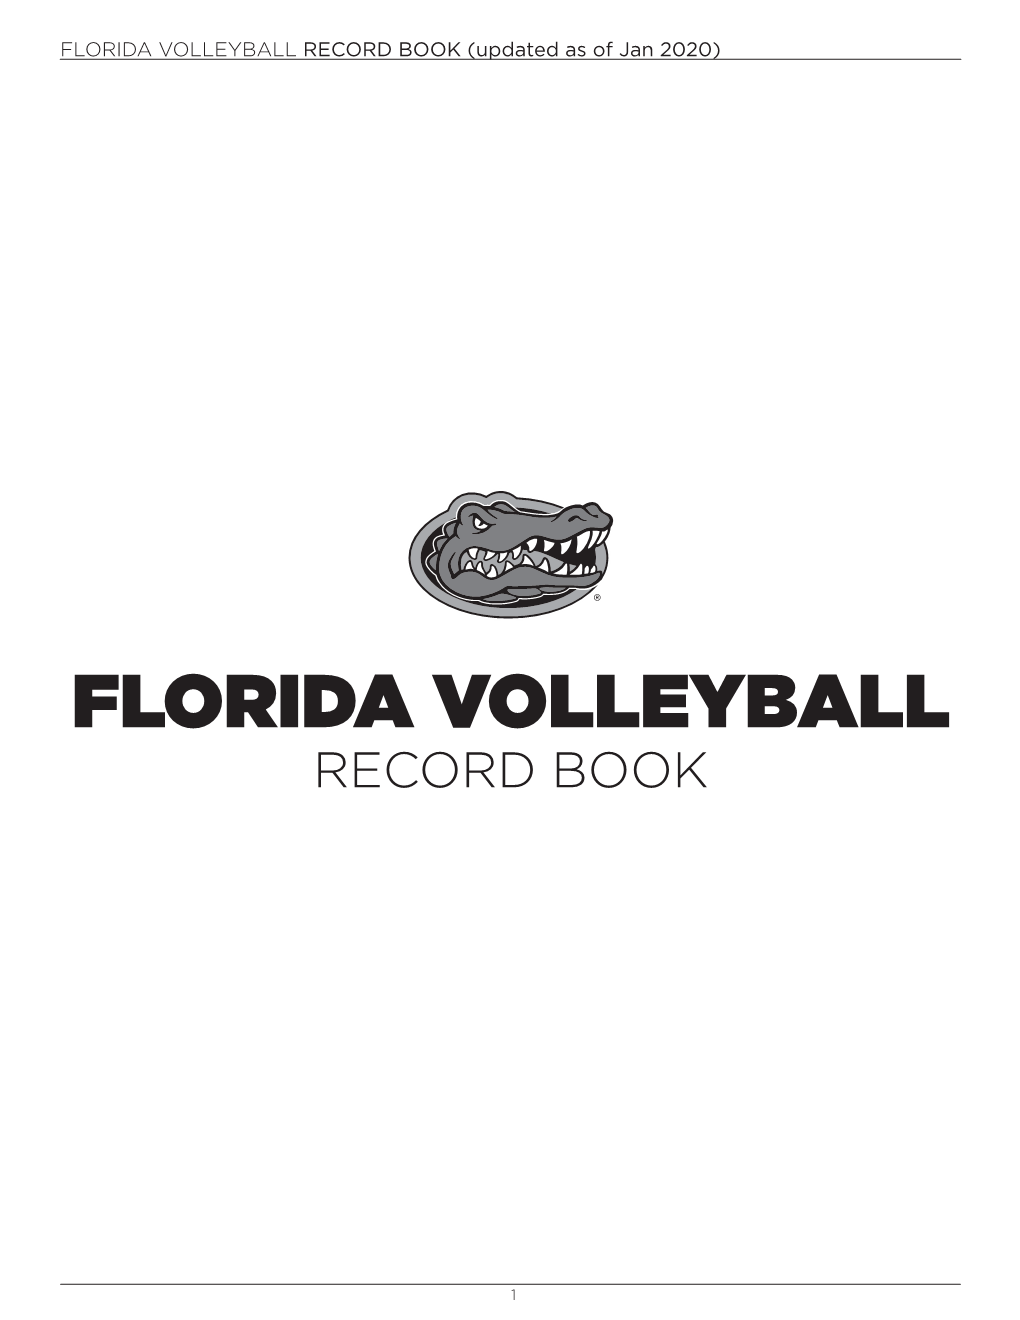 FLORIDA VOLLEYBALL RECORD BOOK (Updated As of Jan 2020)